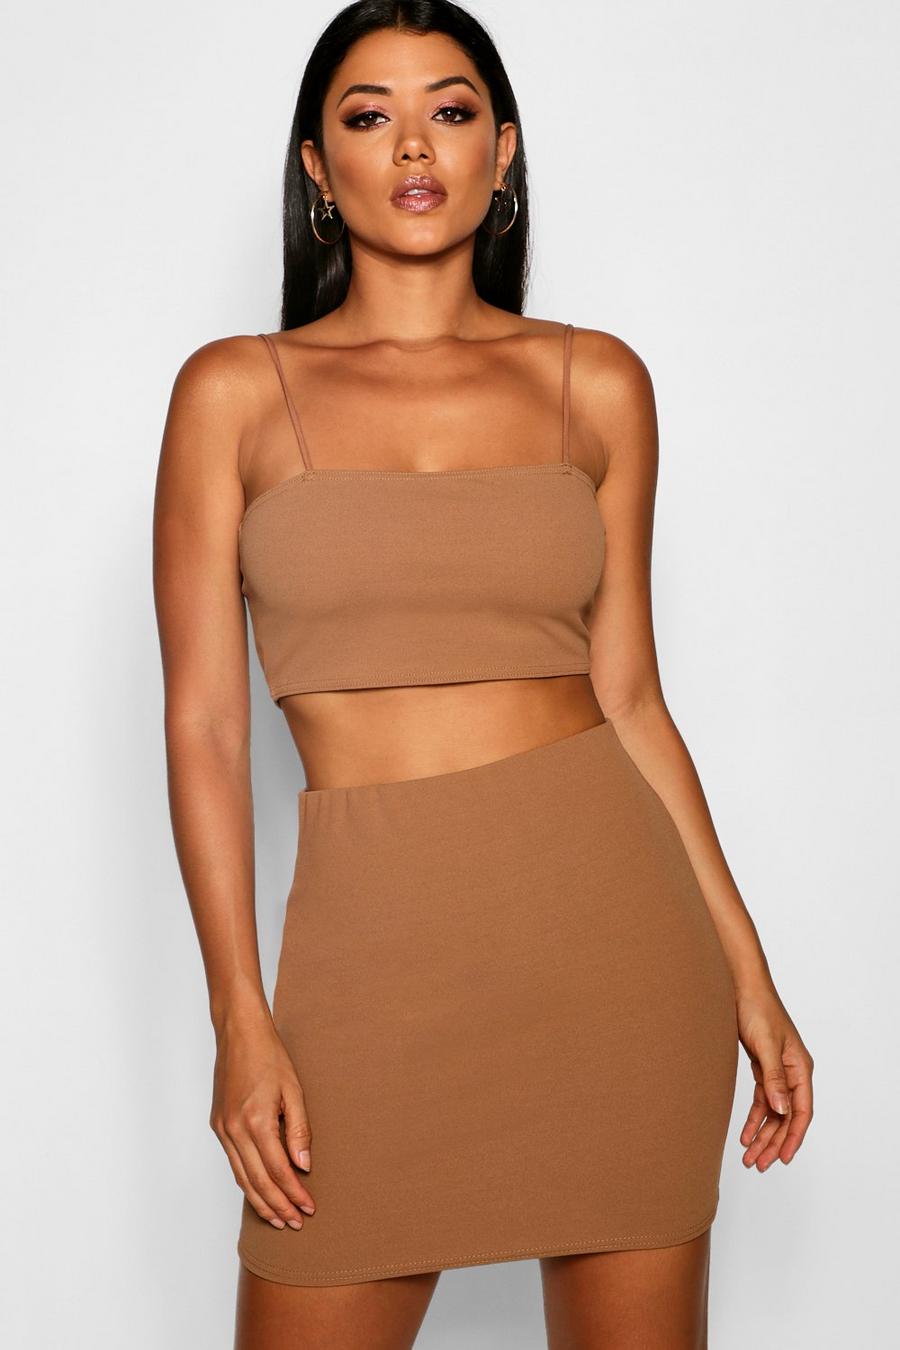 Strappy Crop And Mini Skirt Two-Piece Set